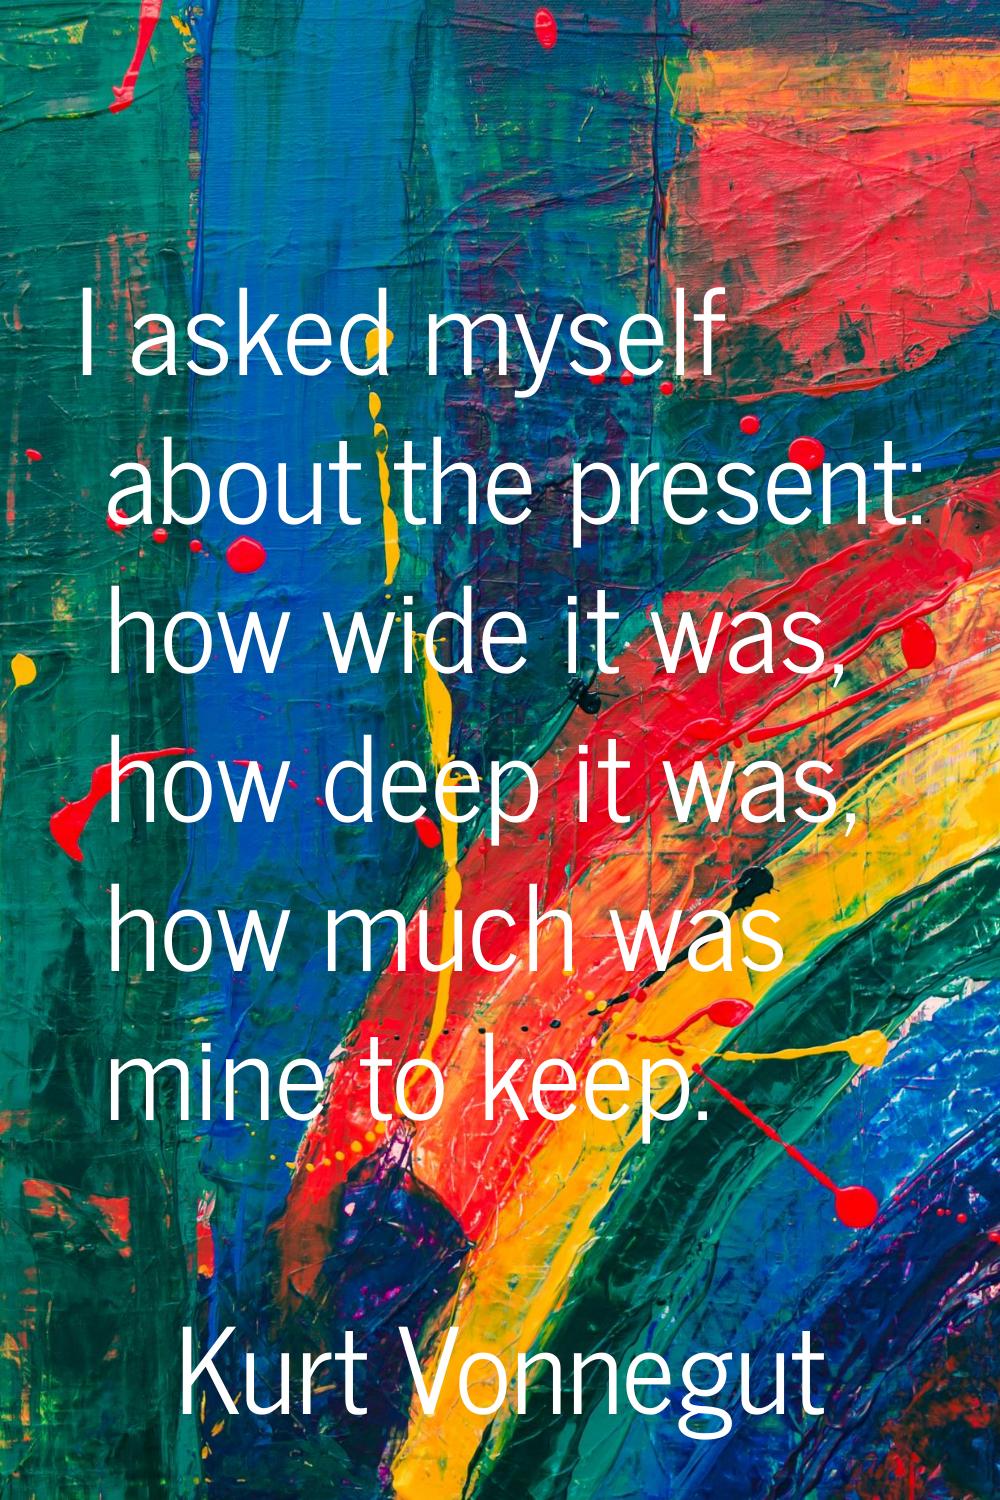 I asked myself about the present: how wide it was, how deep it was, how much was mine to keep.